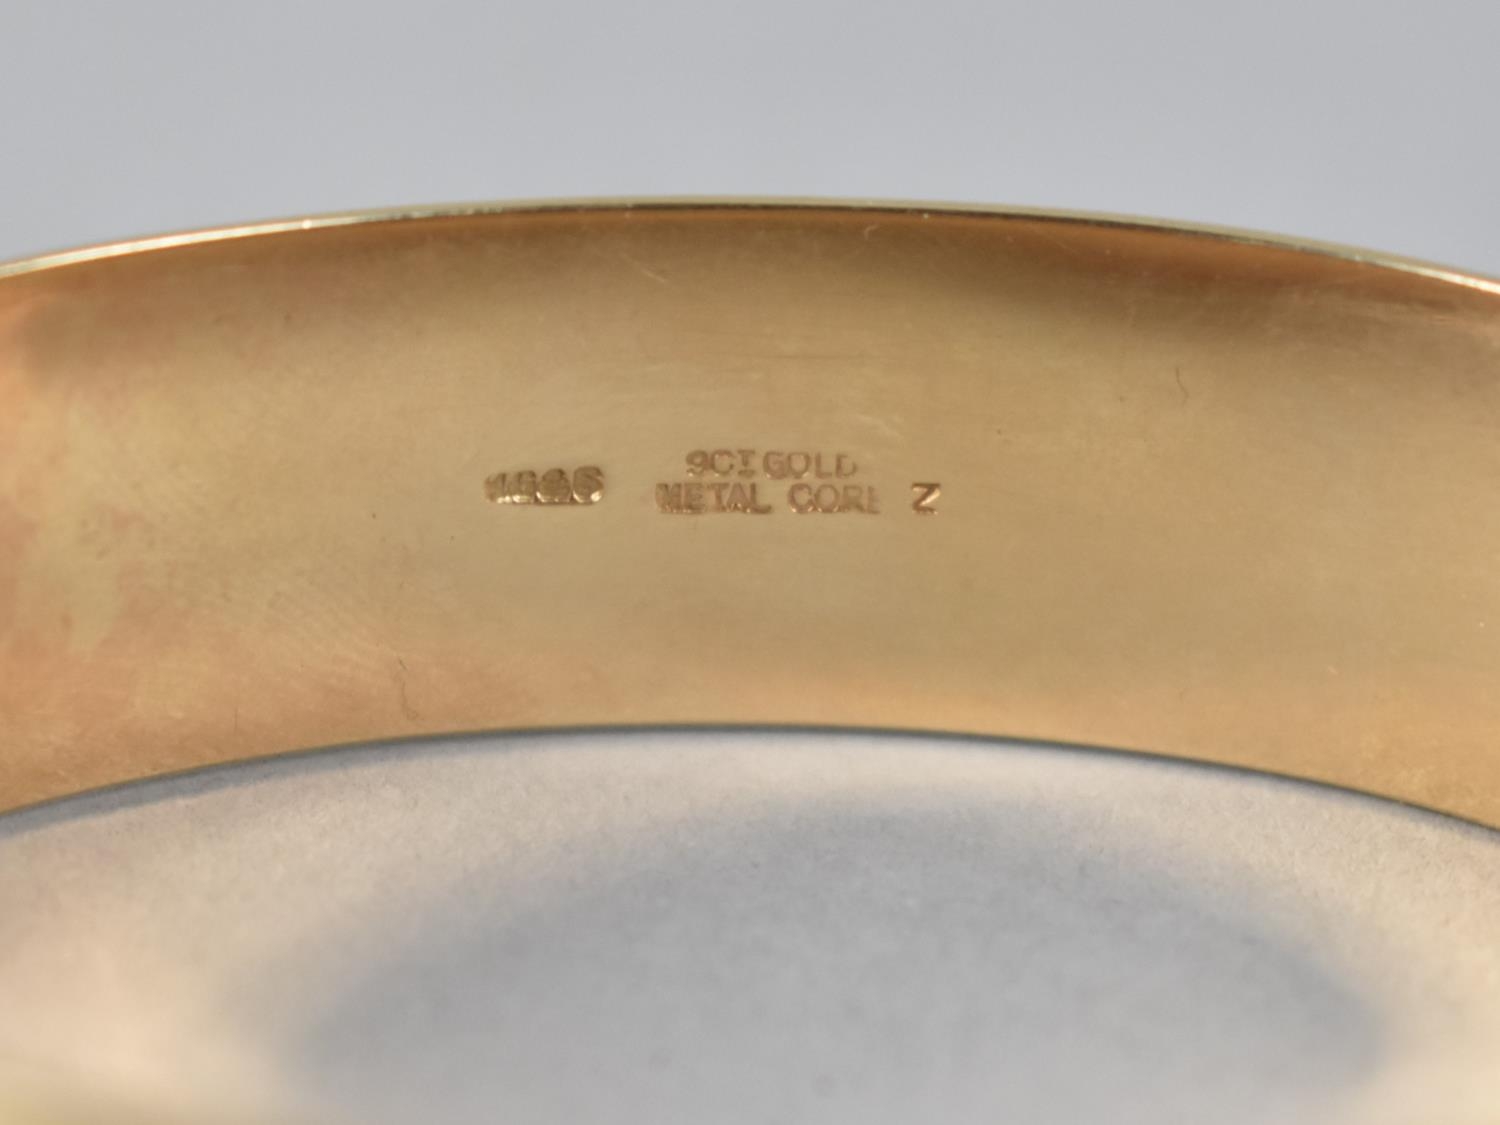 A Vintage Gold Plated Hinged Bangle, 9ct Gold on a Metal Core, Stamped HG and S, Engraved Decoration - Image 3 of 3